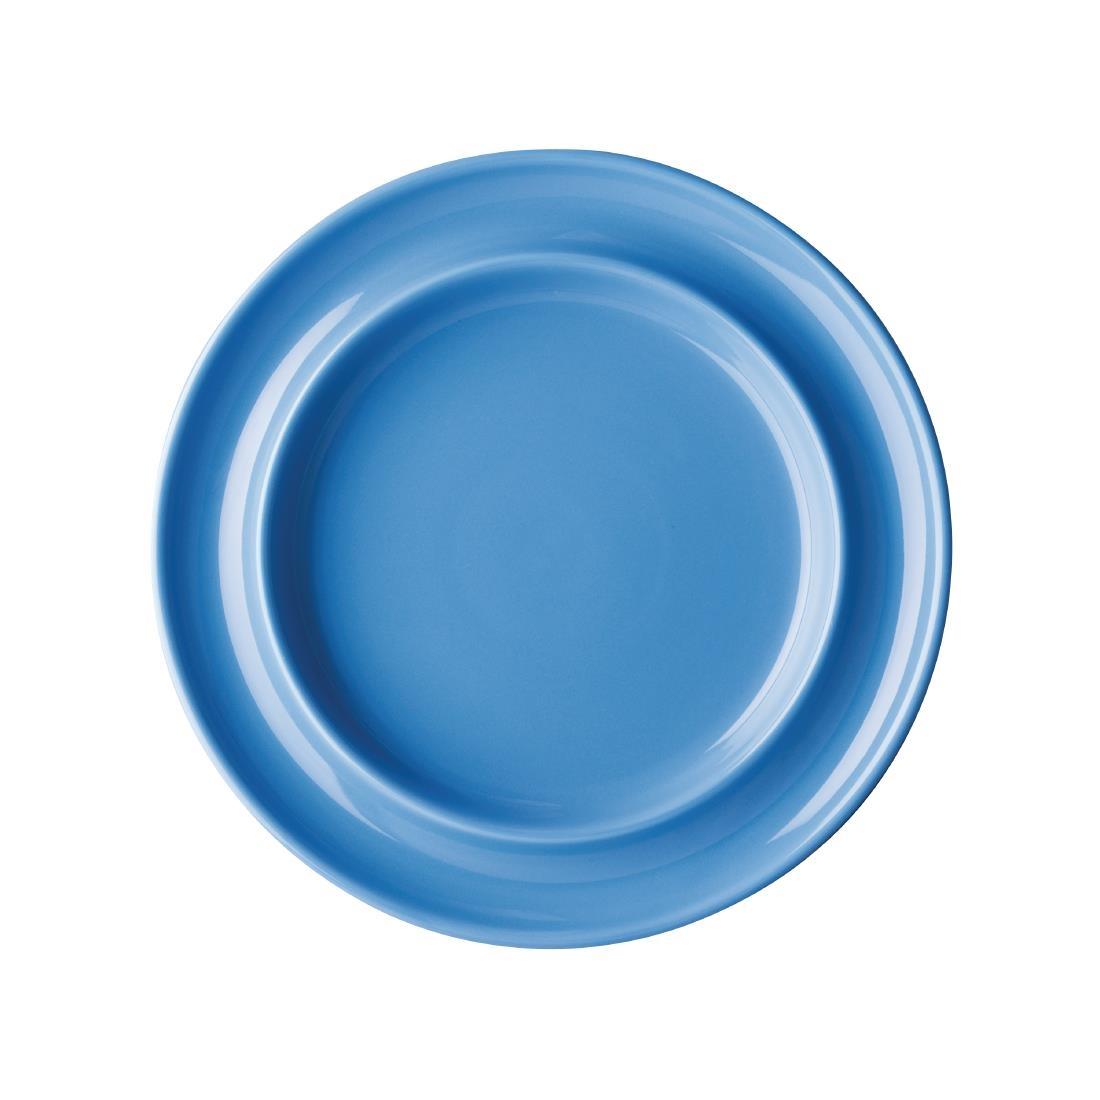 Olympia Heritage Raised Rim Plates Blue 203mm (Pack of 4) - DW140  - 1